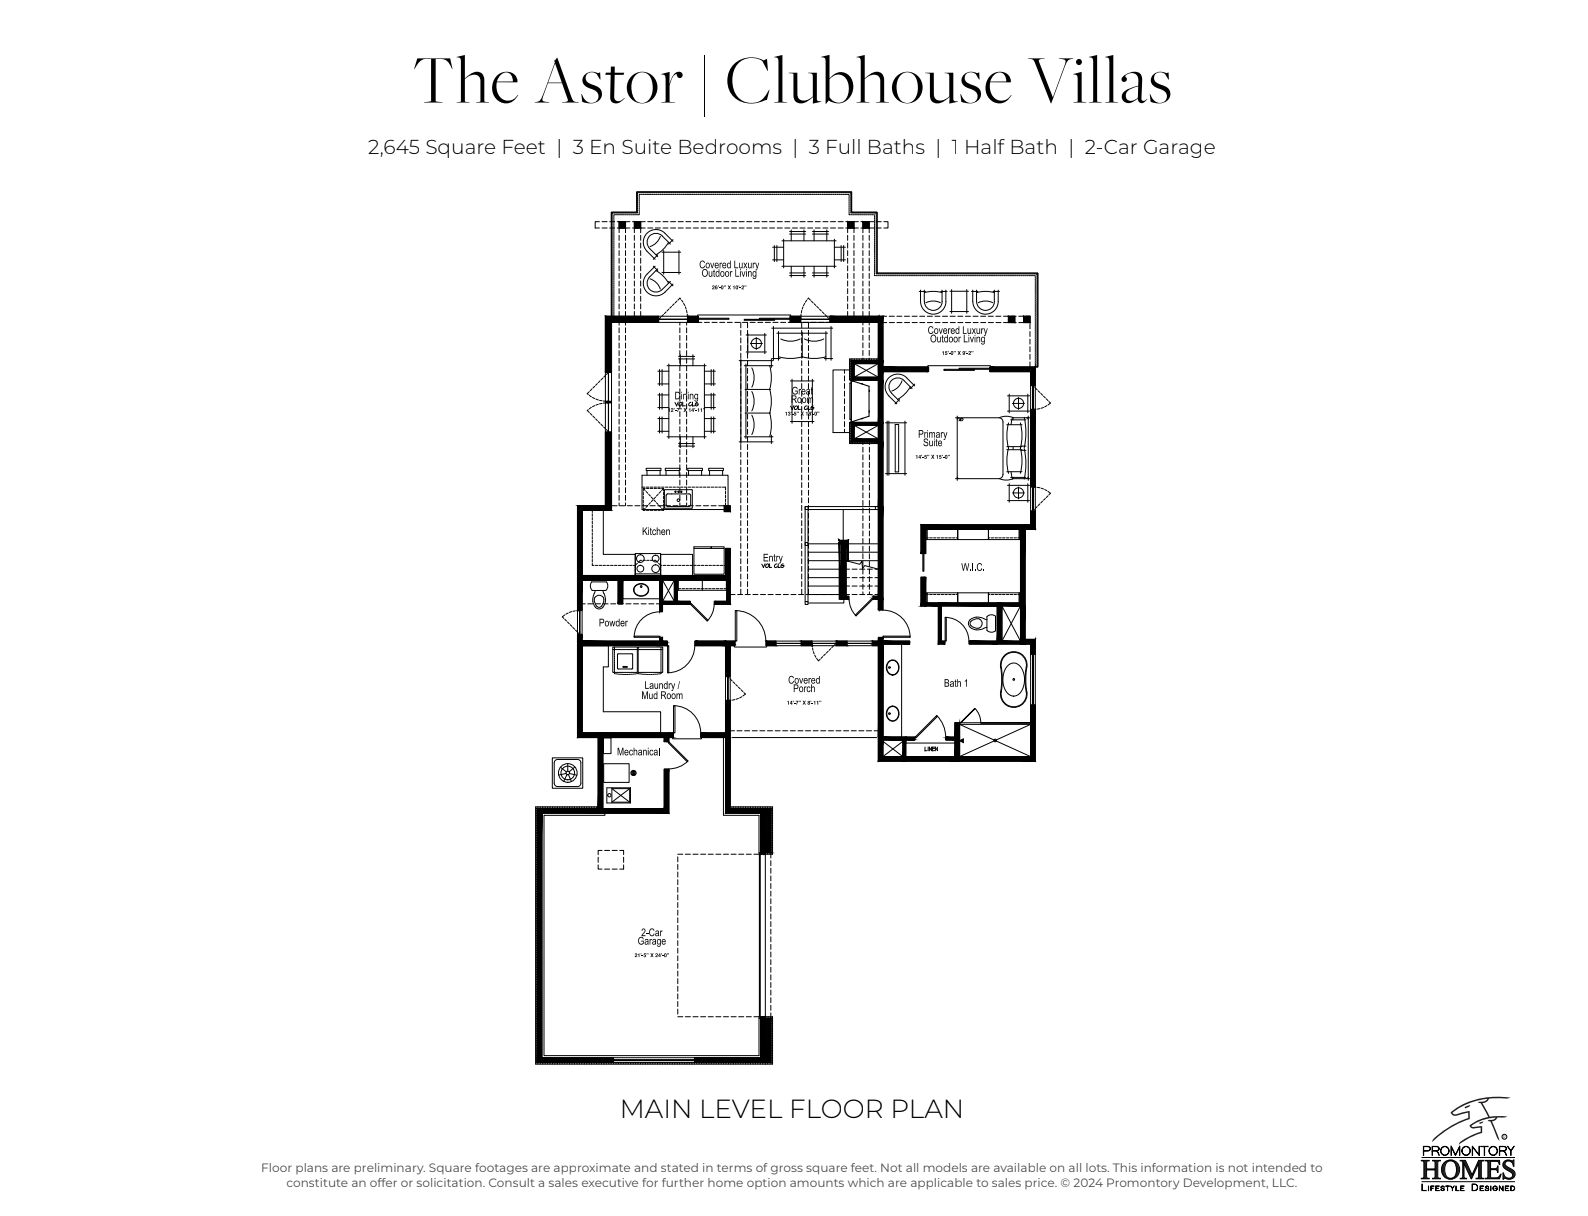 Promontory homes - The Astor